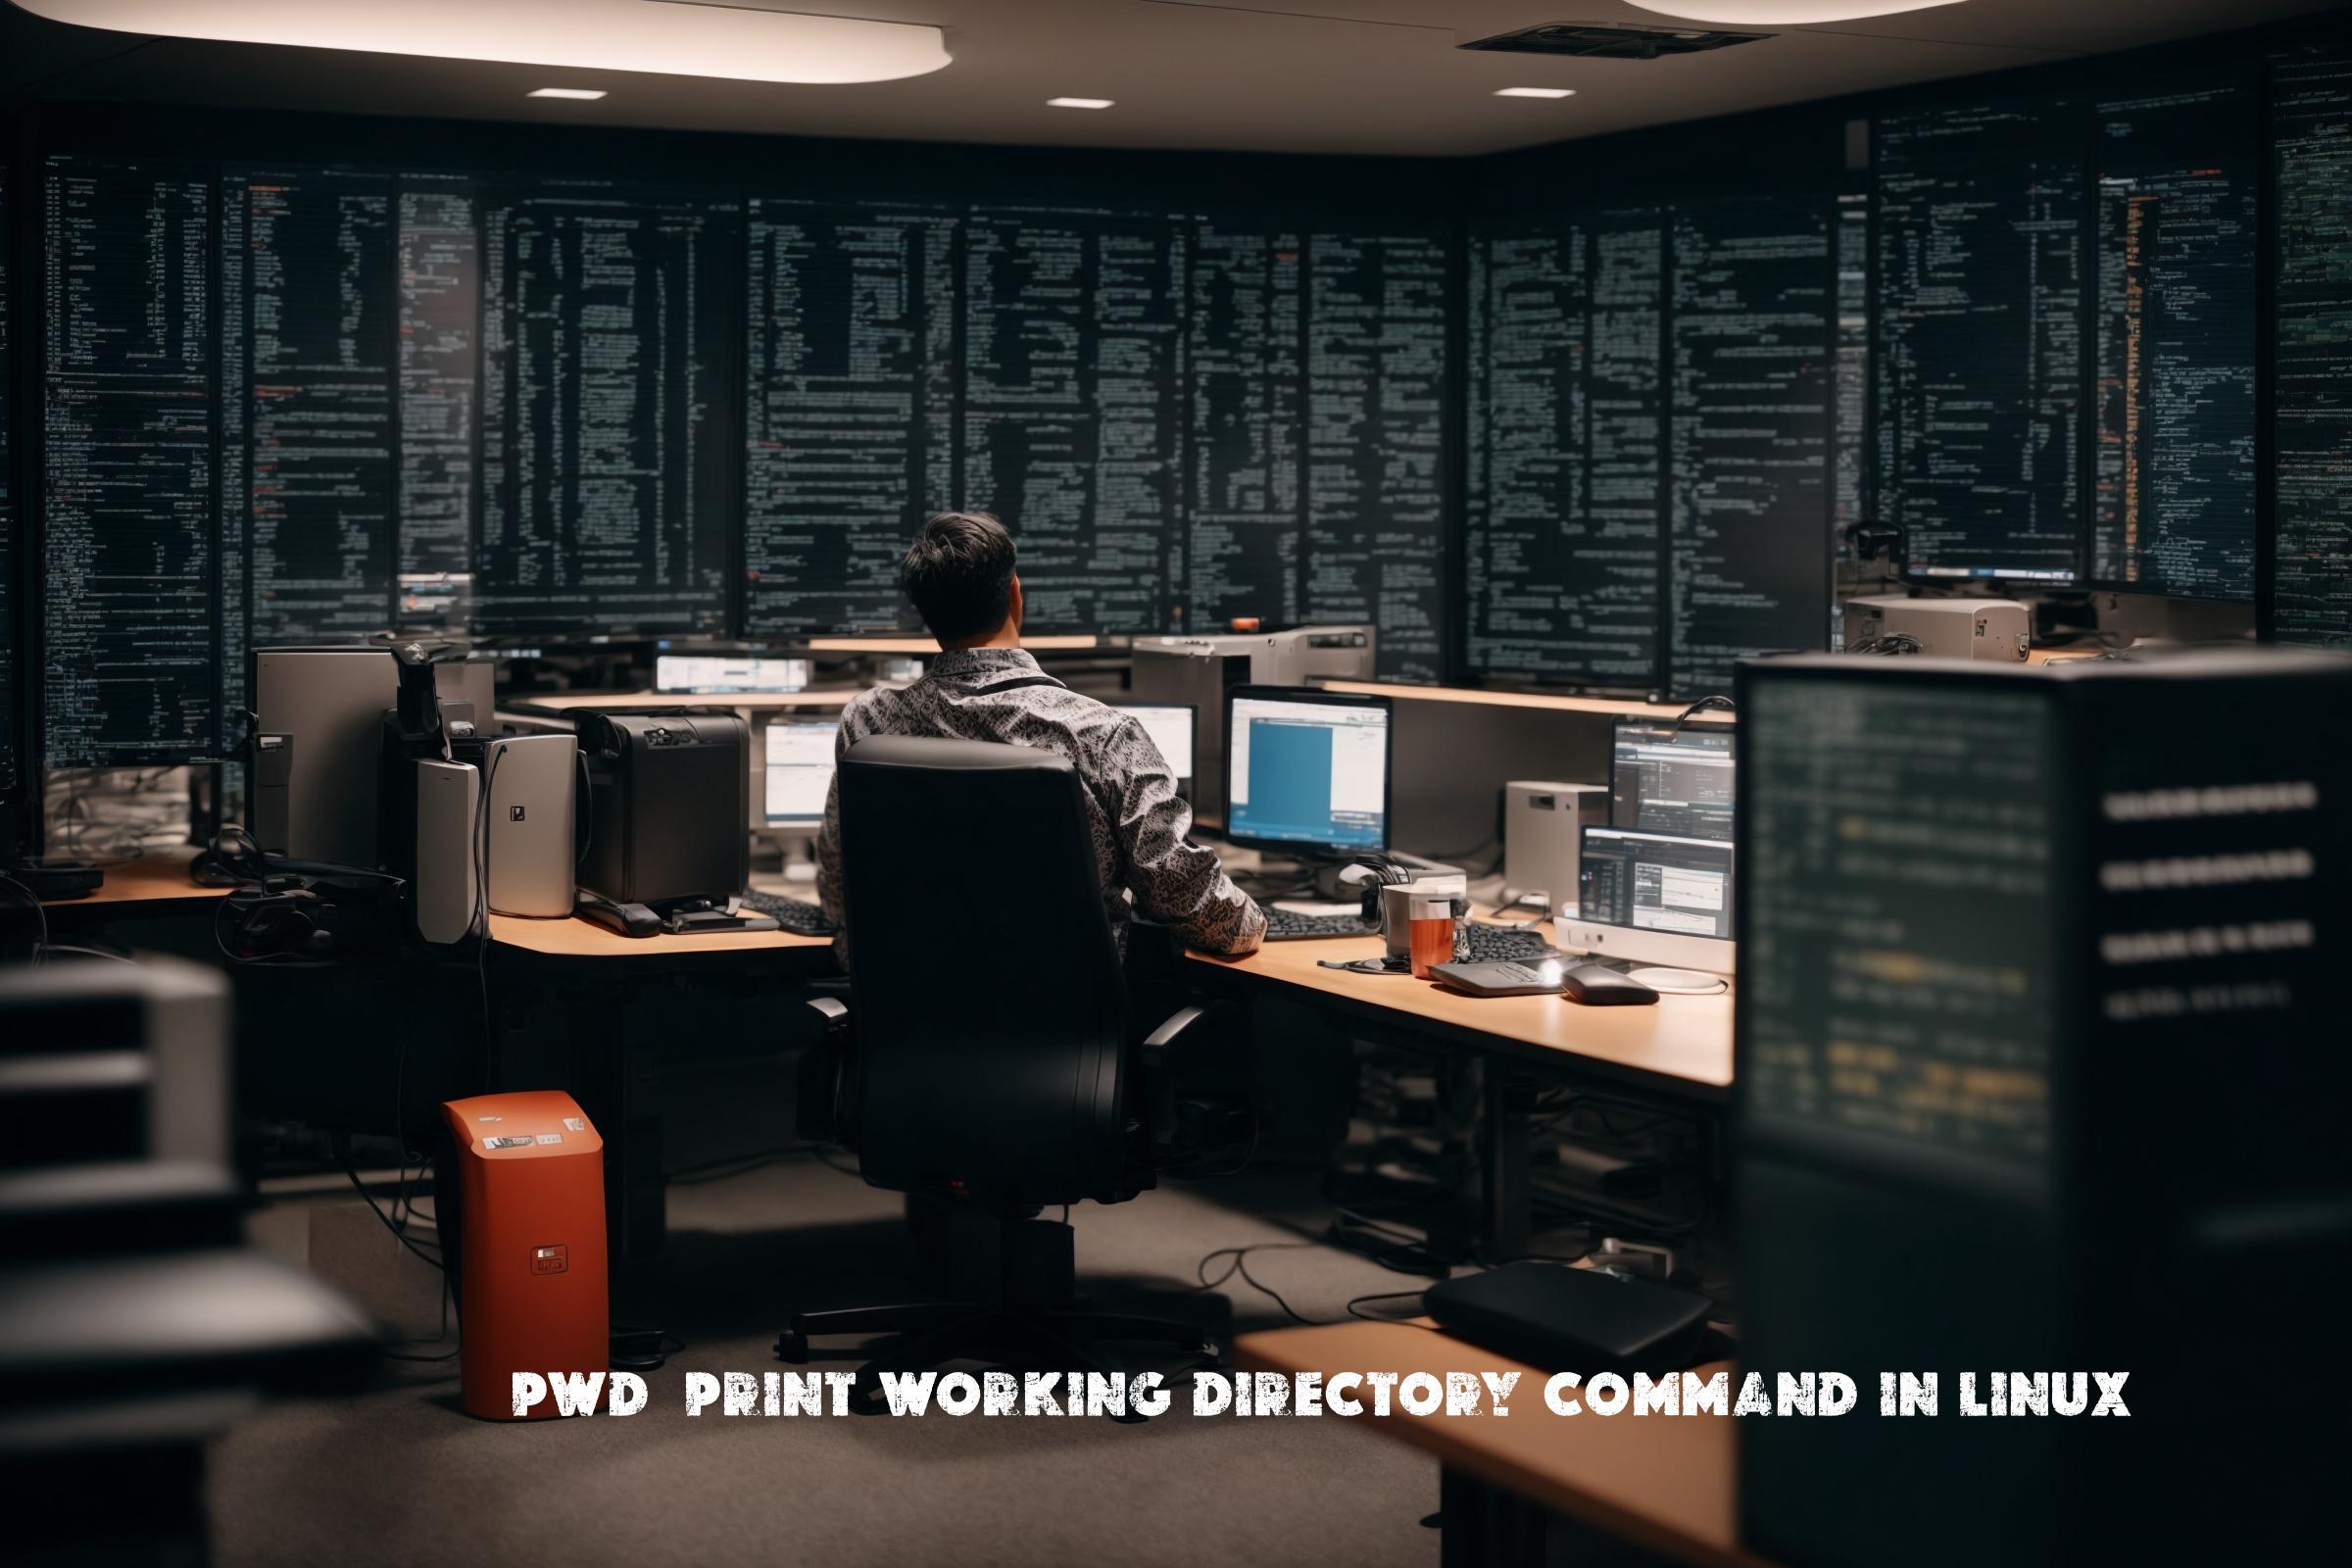 Introduction to pwd (Print working directory command in Linux)